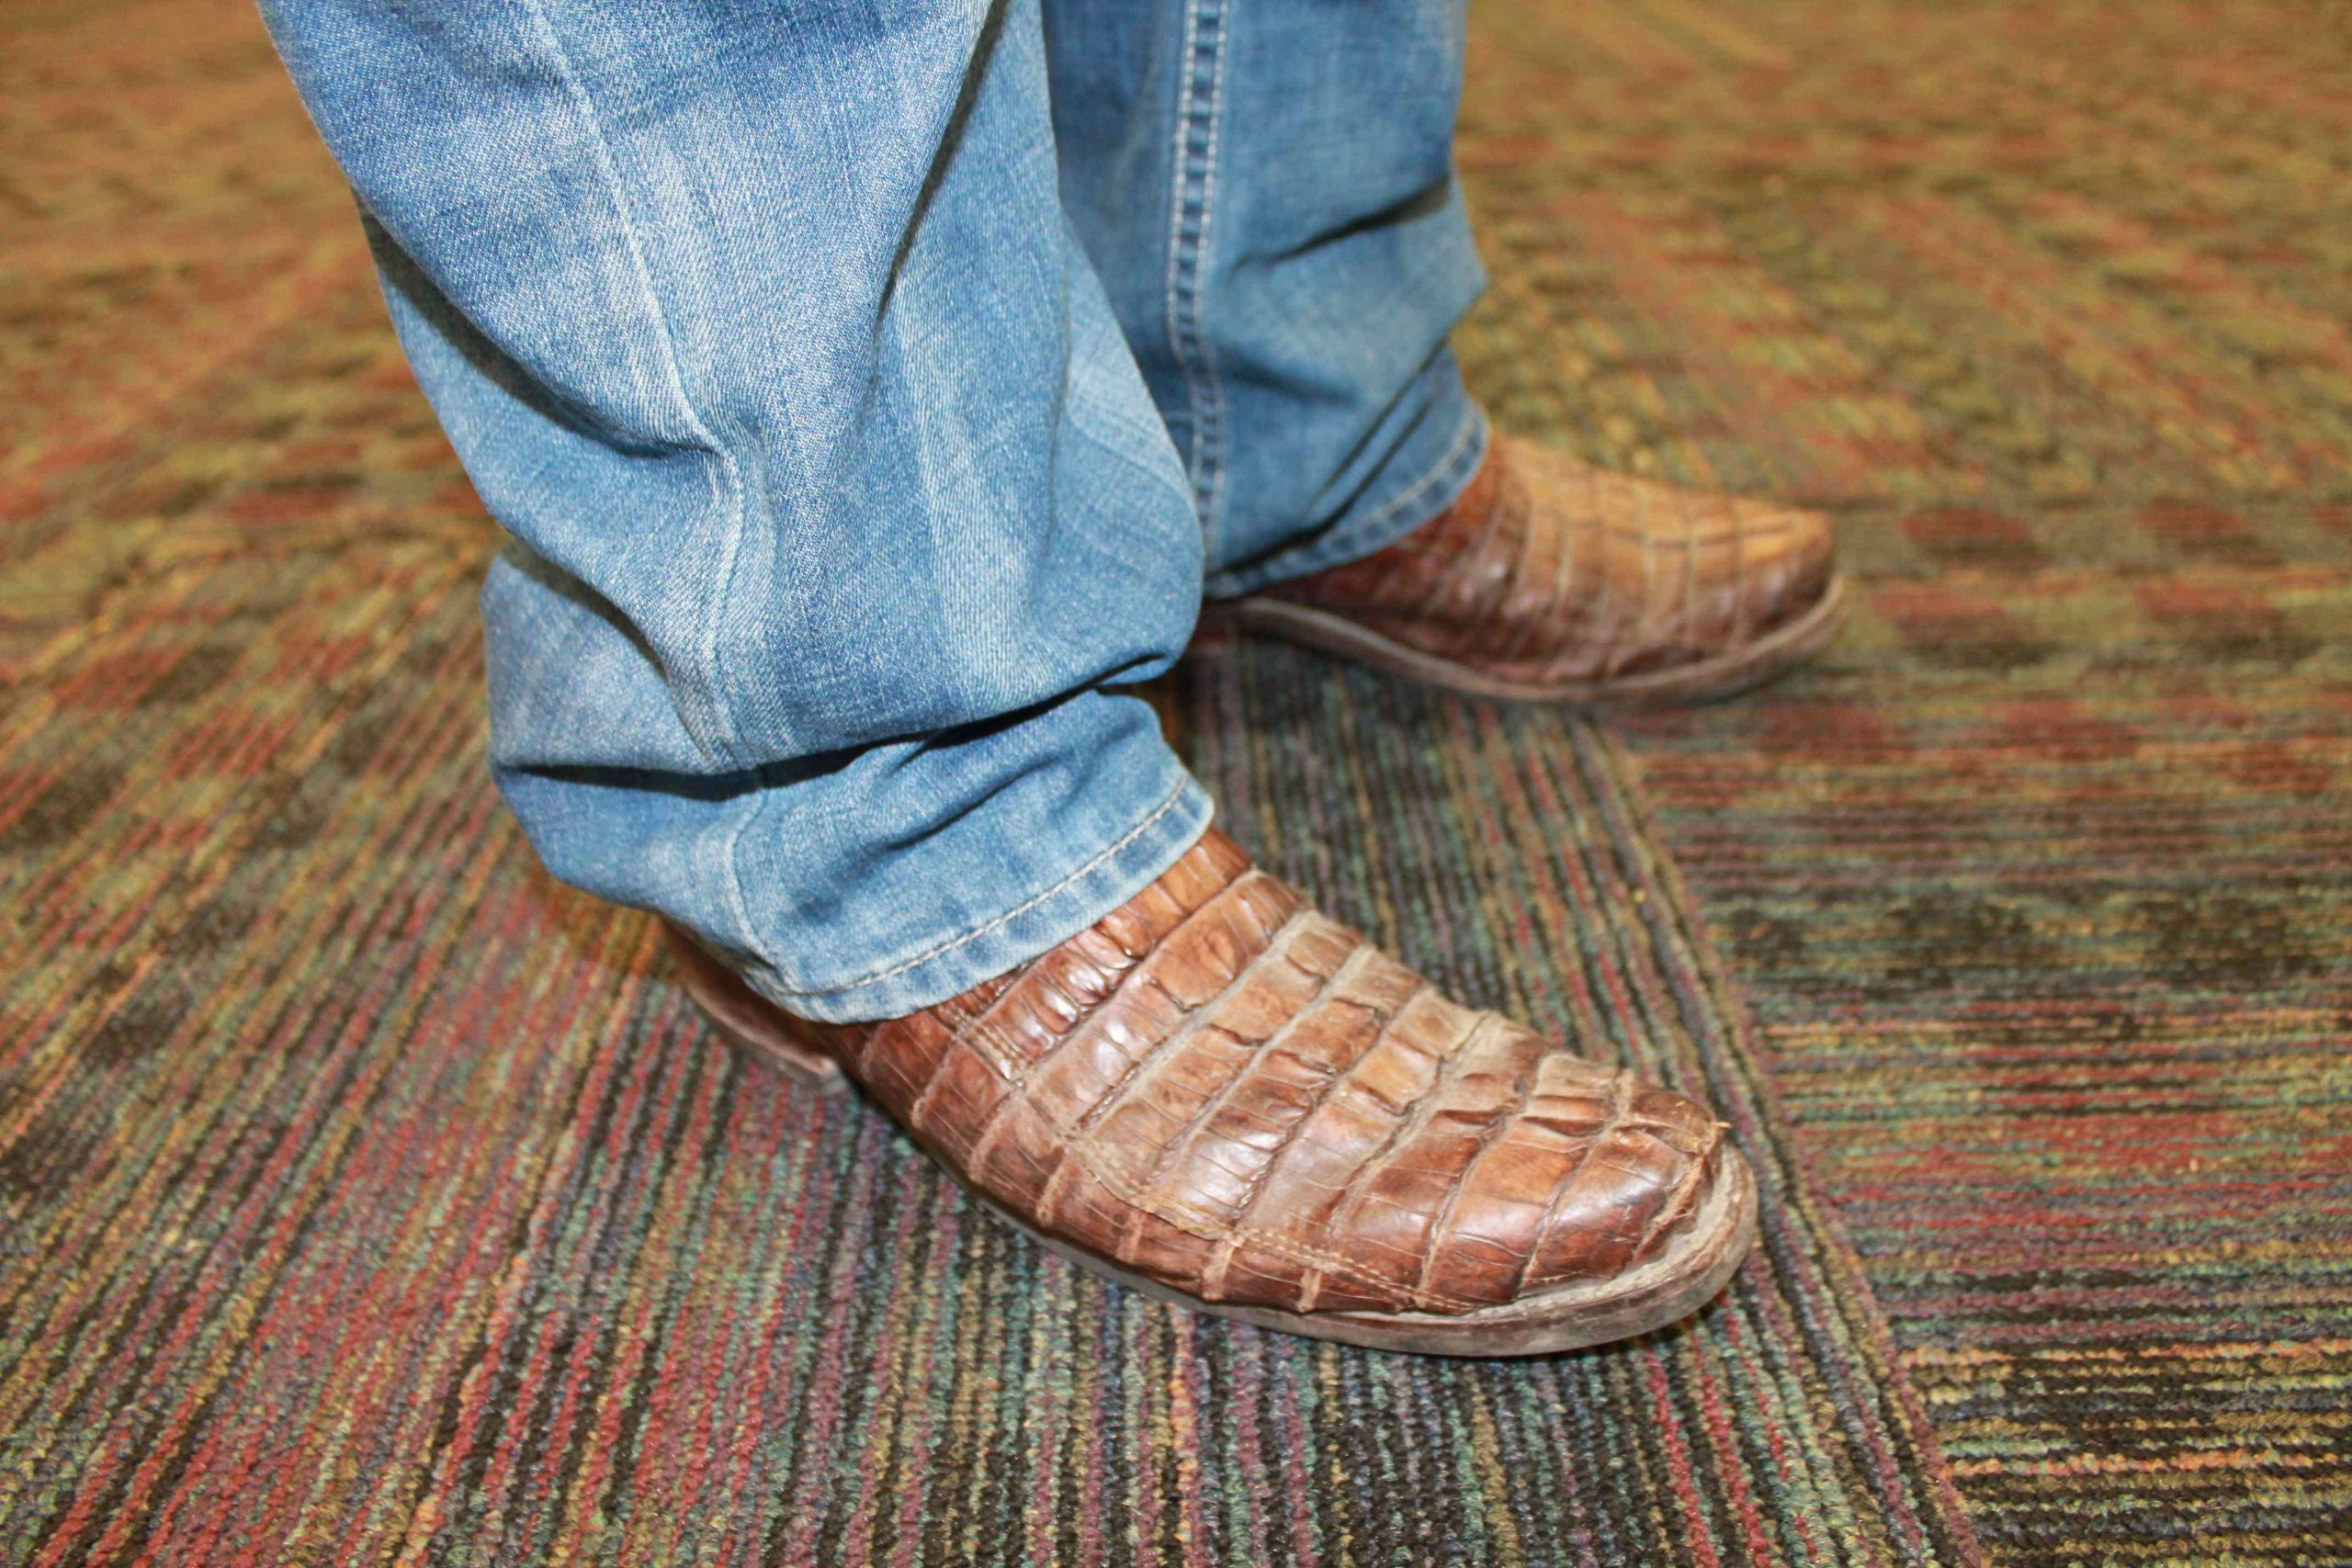 There were more flips flops than cowboy boots at the B.A.S.S. Nation Central Divisional registration, but Texas angler Ryand Kirchoff represented in these kickers. 
